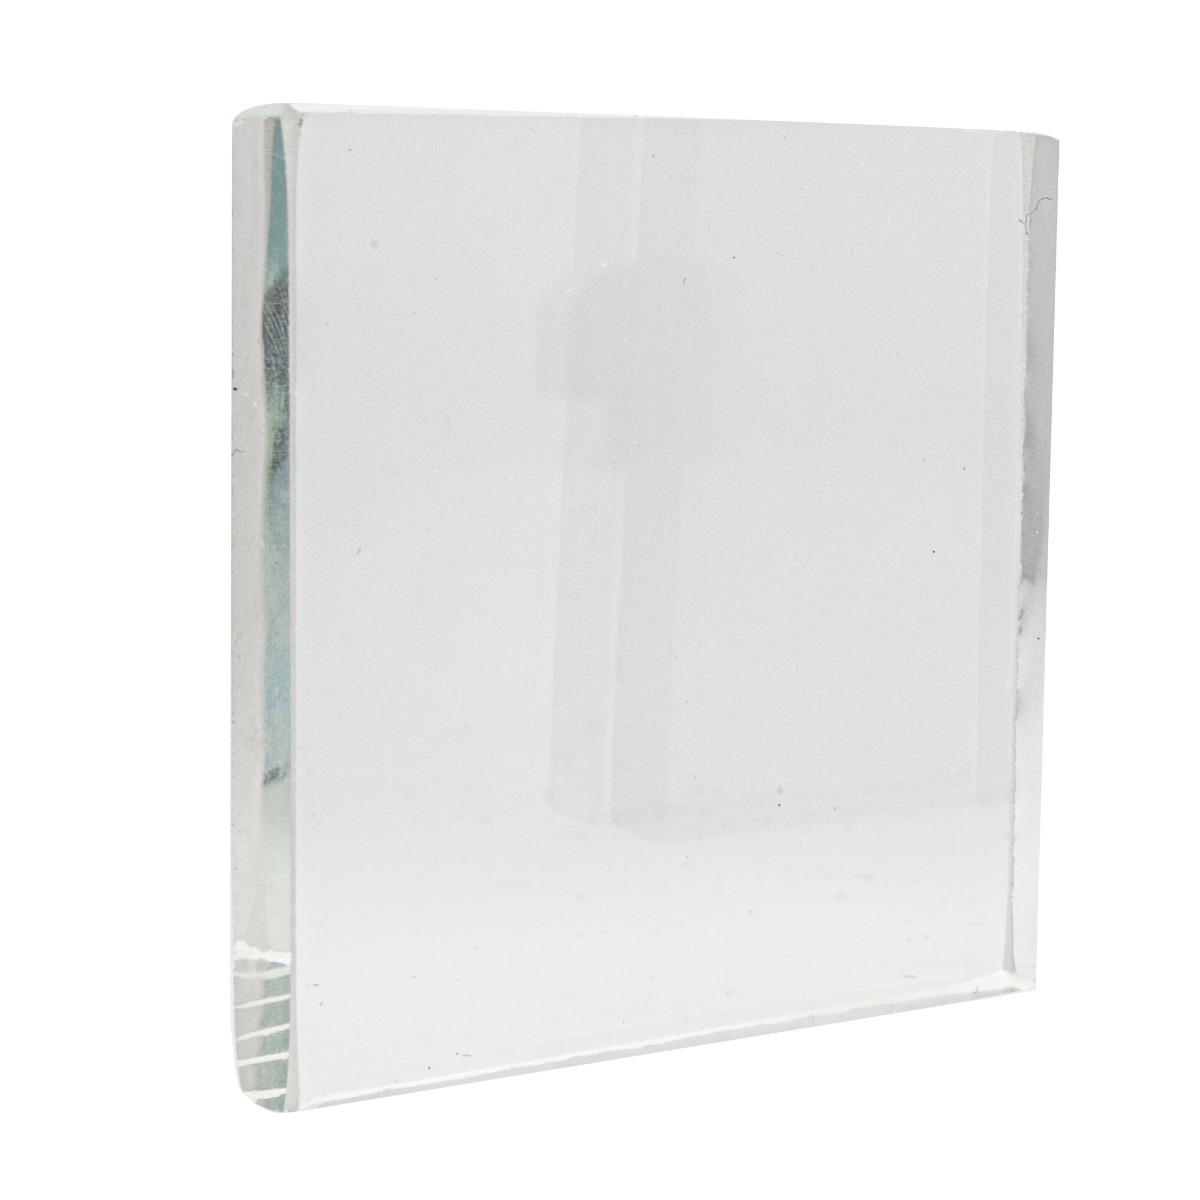 48mm Square x 6mm Thick Clear Sight Glass